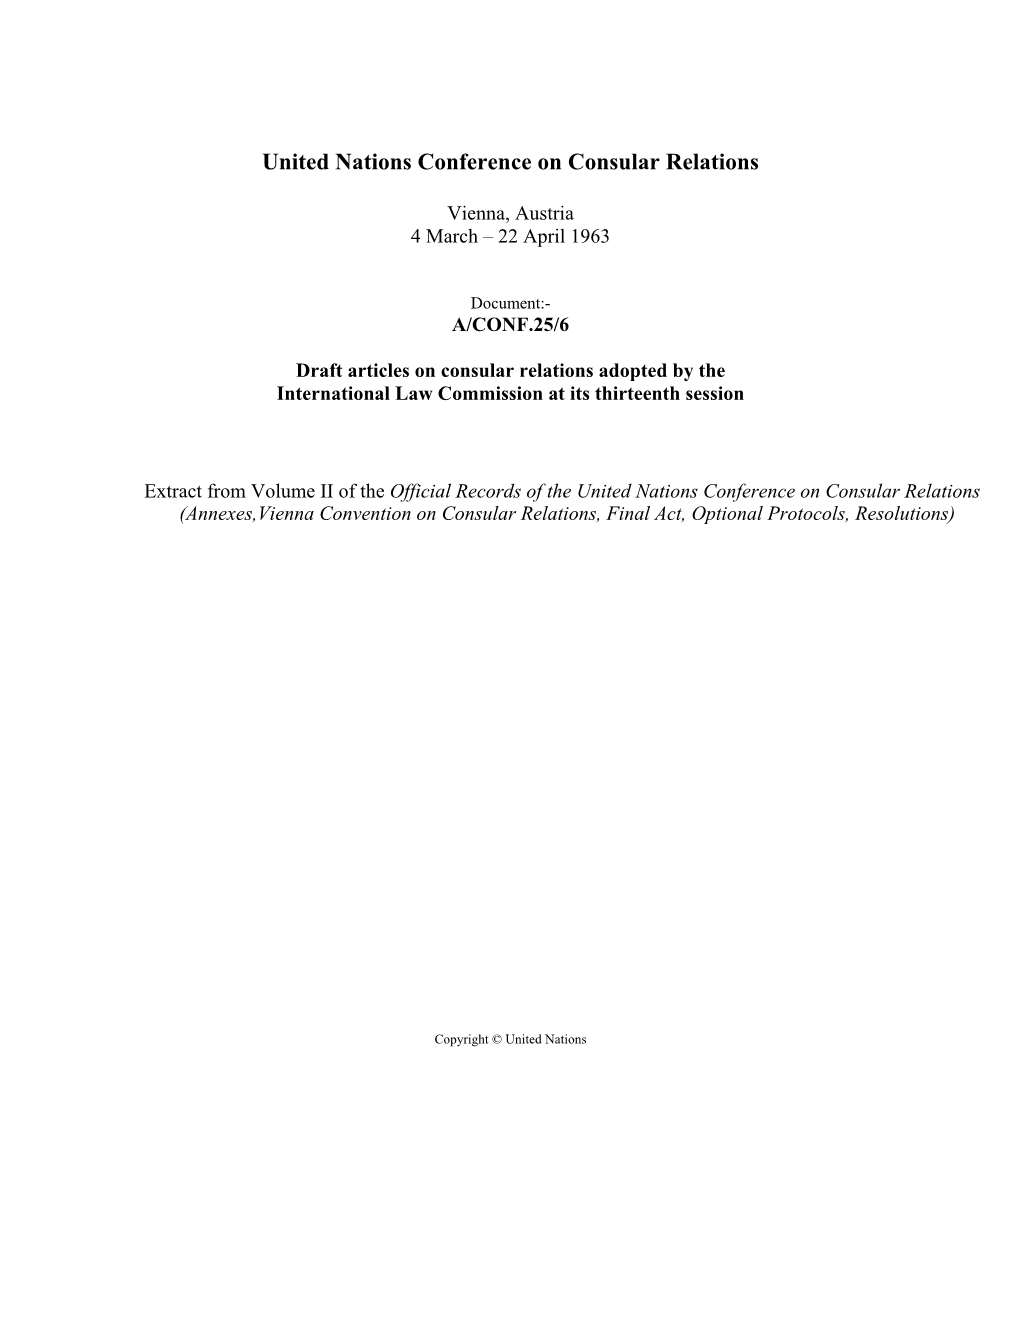 United Nations Conference on Consular Relations, Volume II, 1963